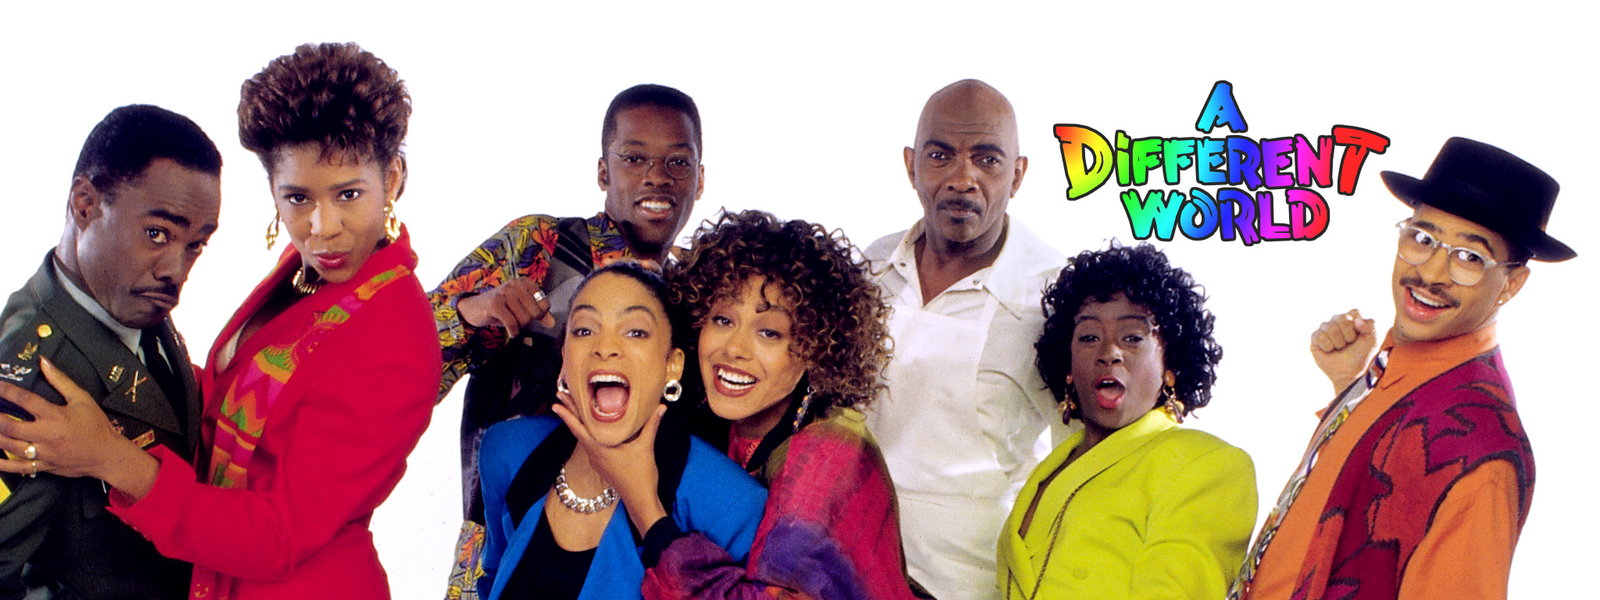 Cast of A Different World per Hulu and Netflix's advertisements